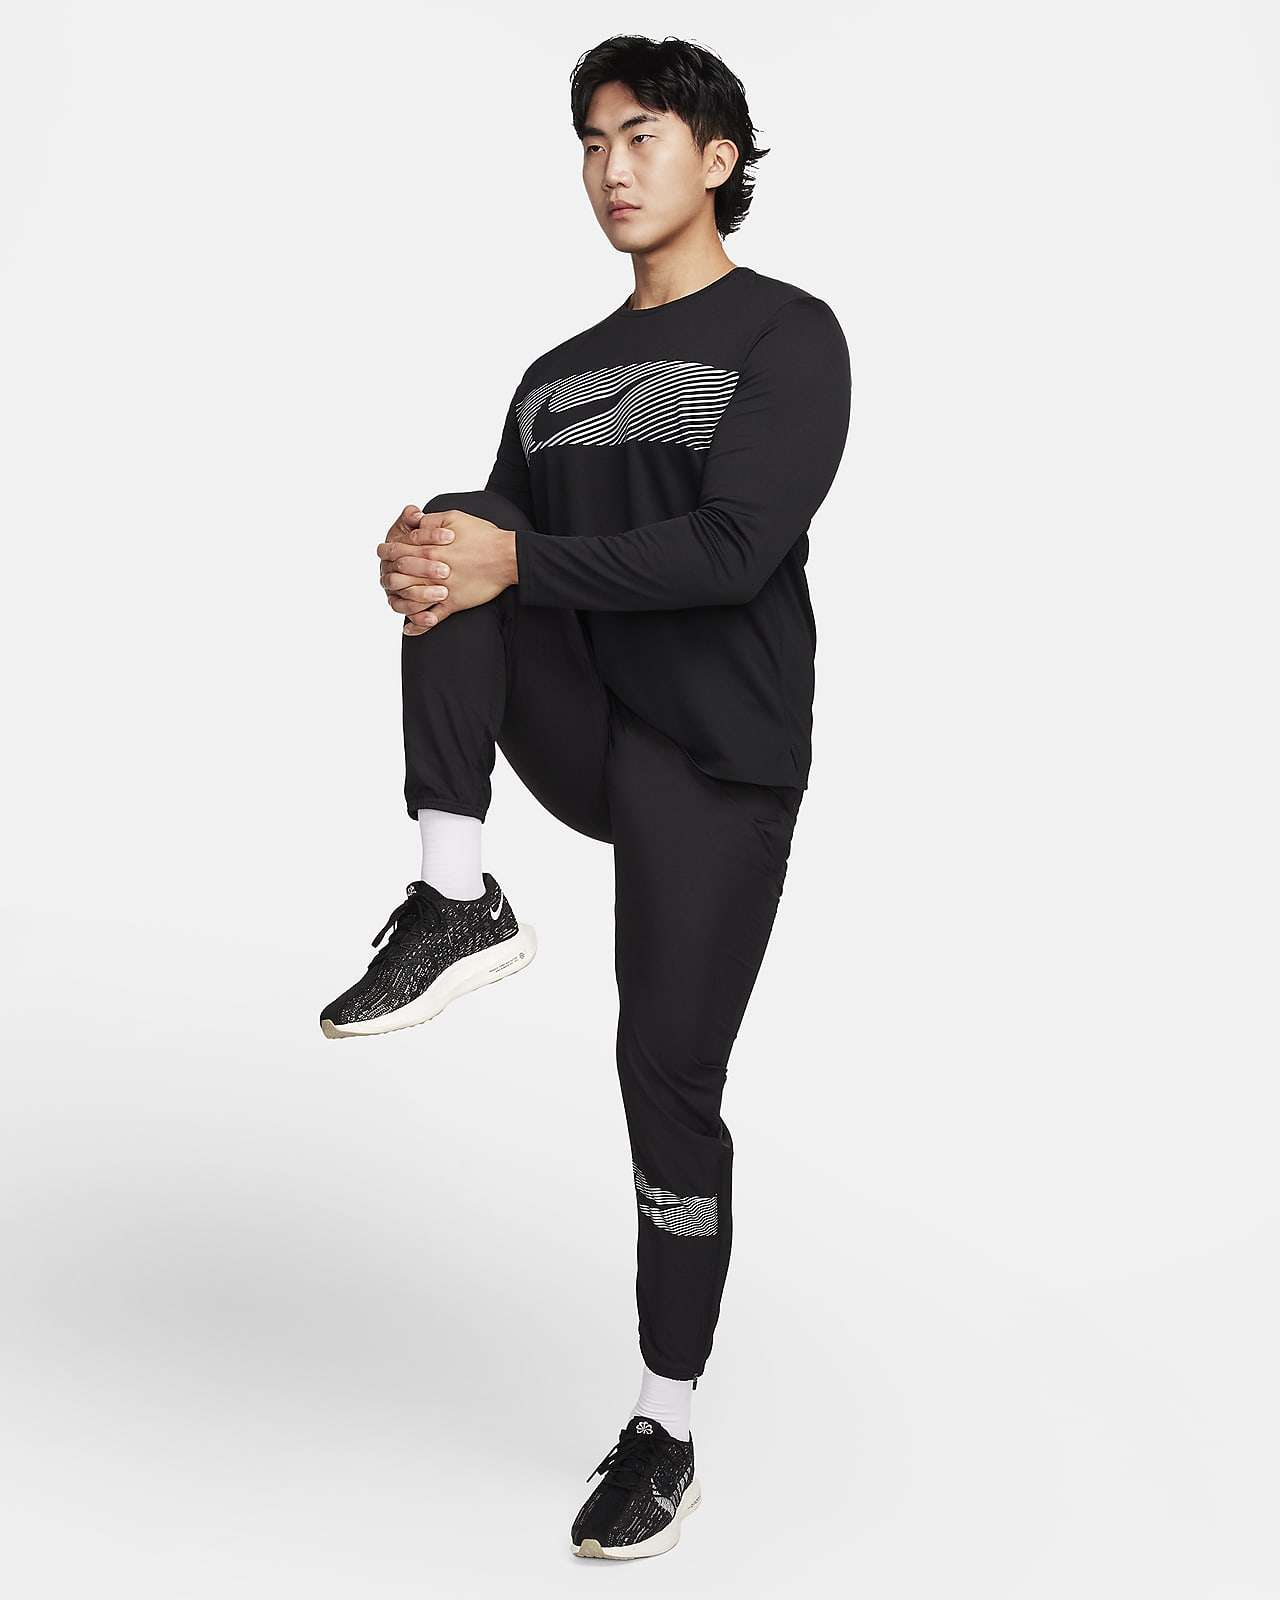 Nike Running Dri-FIT Run Division Challenger Flash woven pants in black